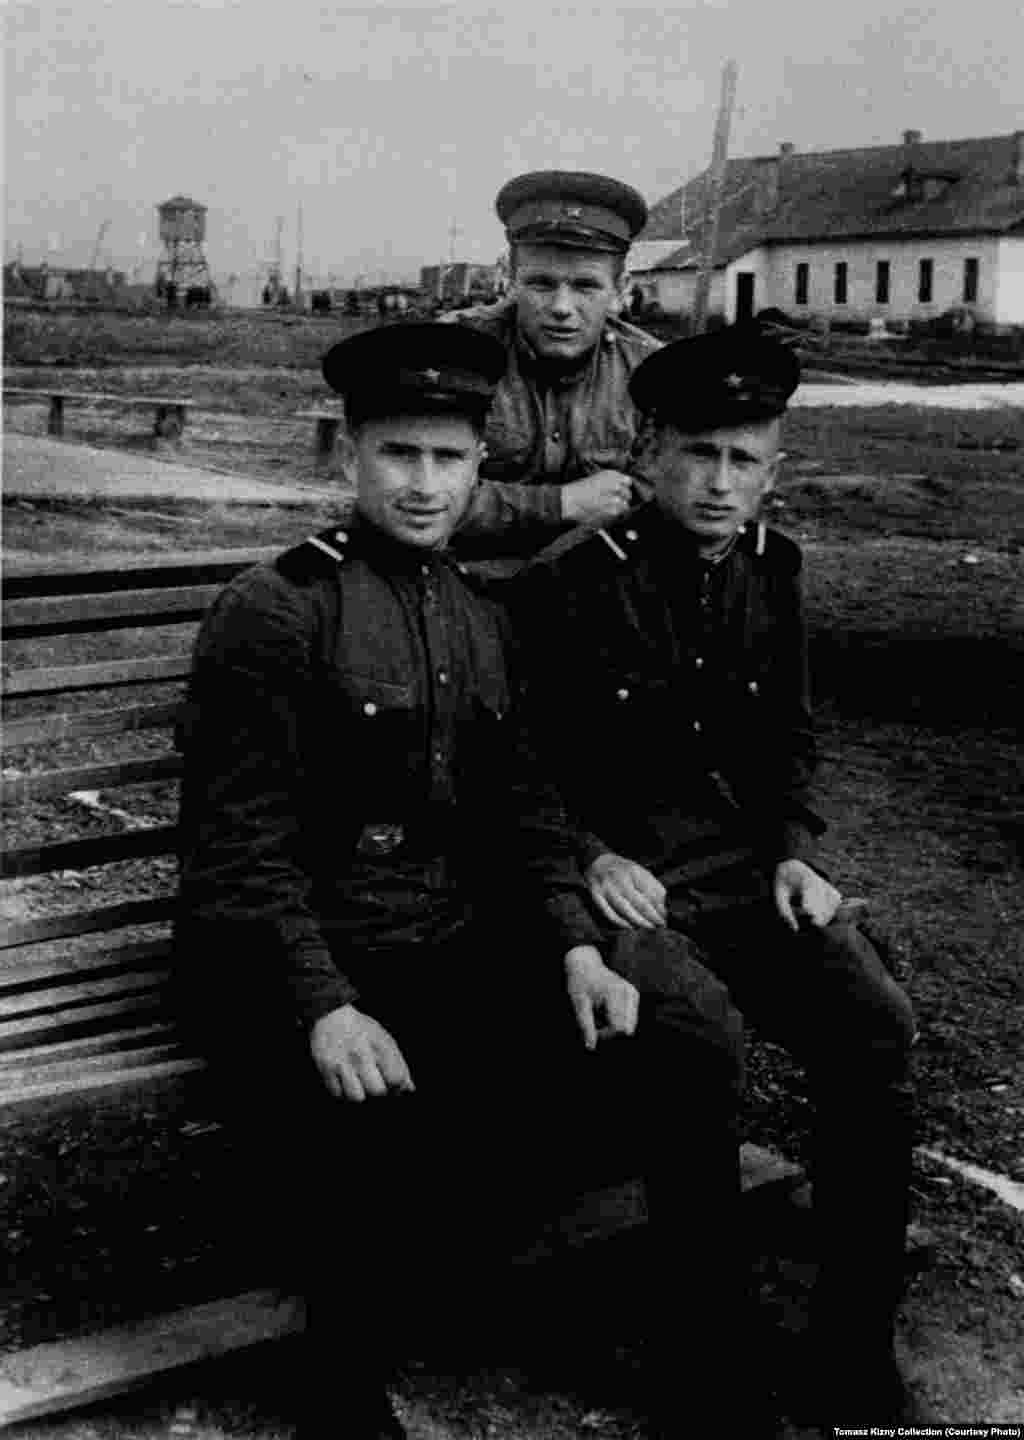 An undated photograph shows Vorkuta camp guards. Guards were most often recruited on three-year contracts after completing their basic military service. Regulations allowed guards to shoot without warning any prisoner who strayed outside the designated work zone or too near a camp fence.